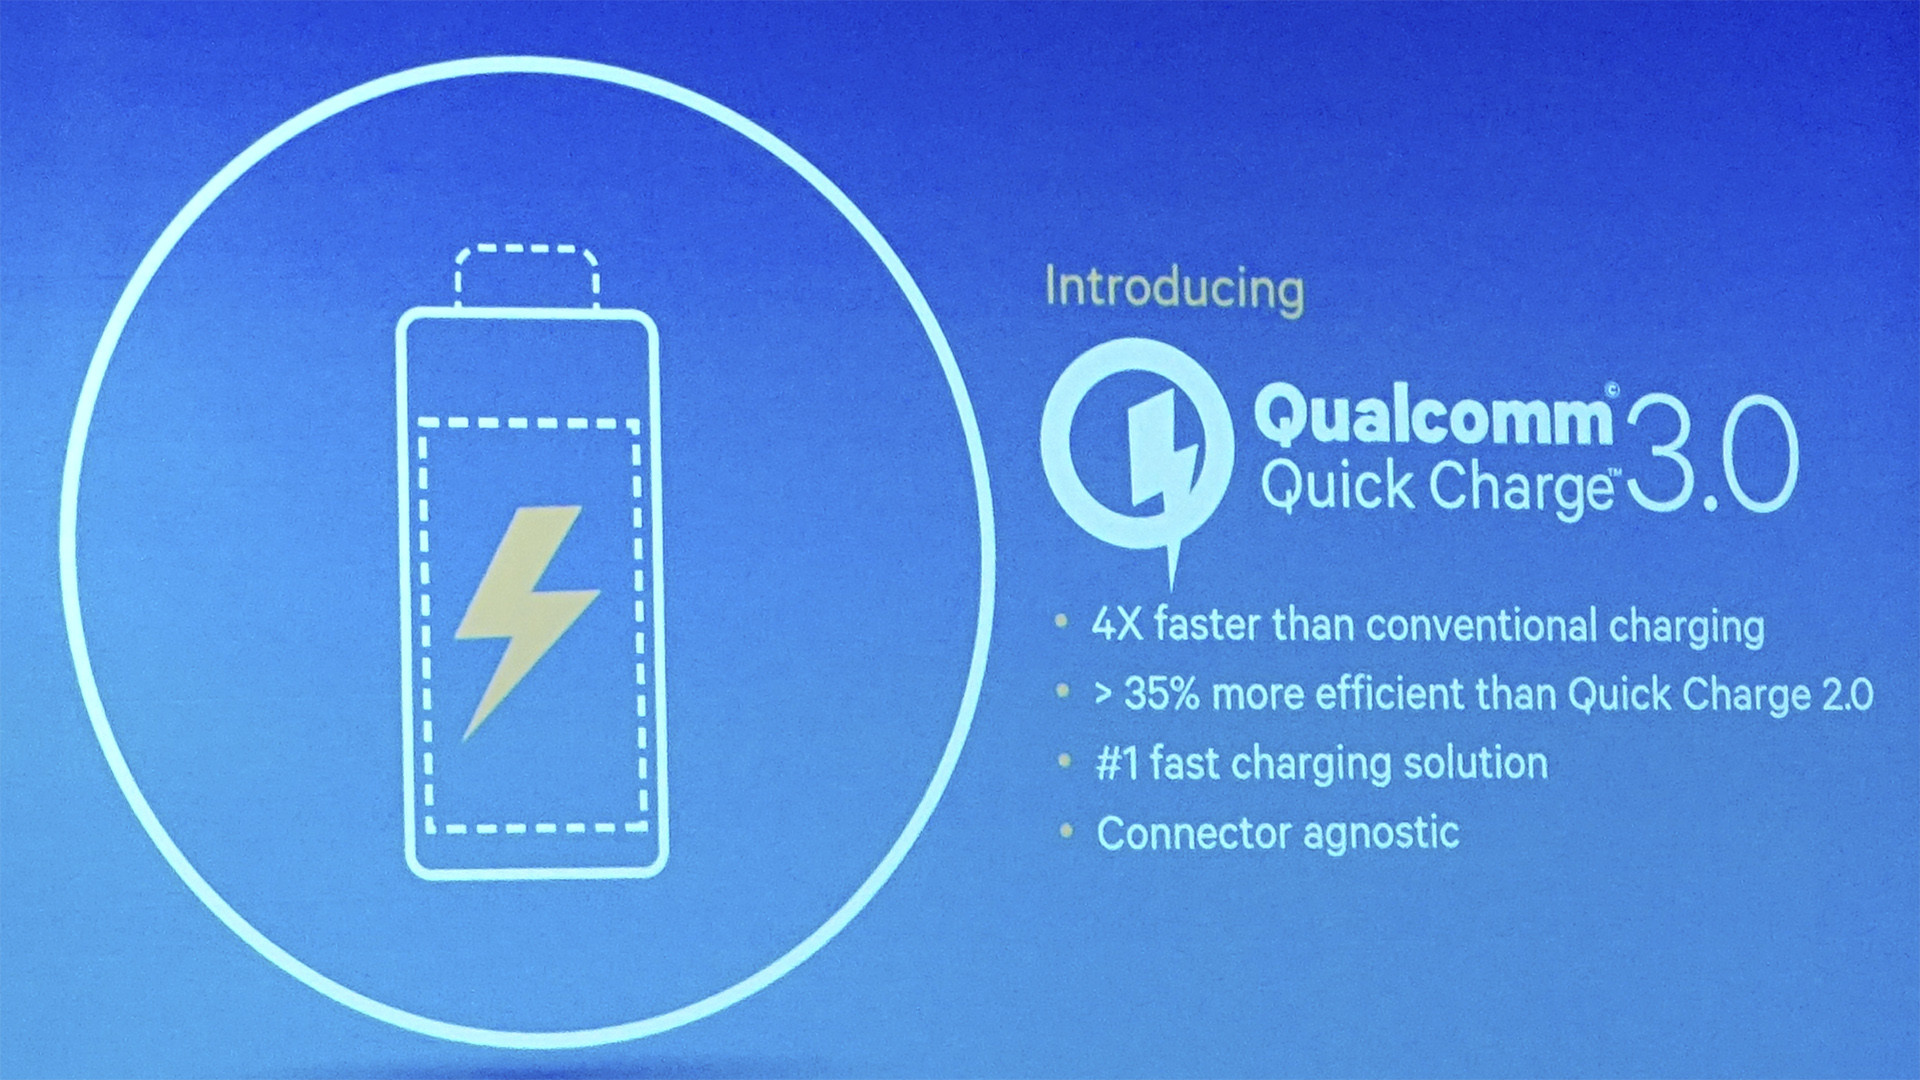 quick charge 3